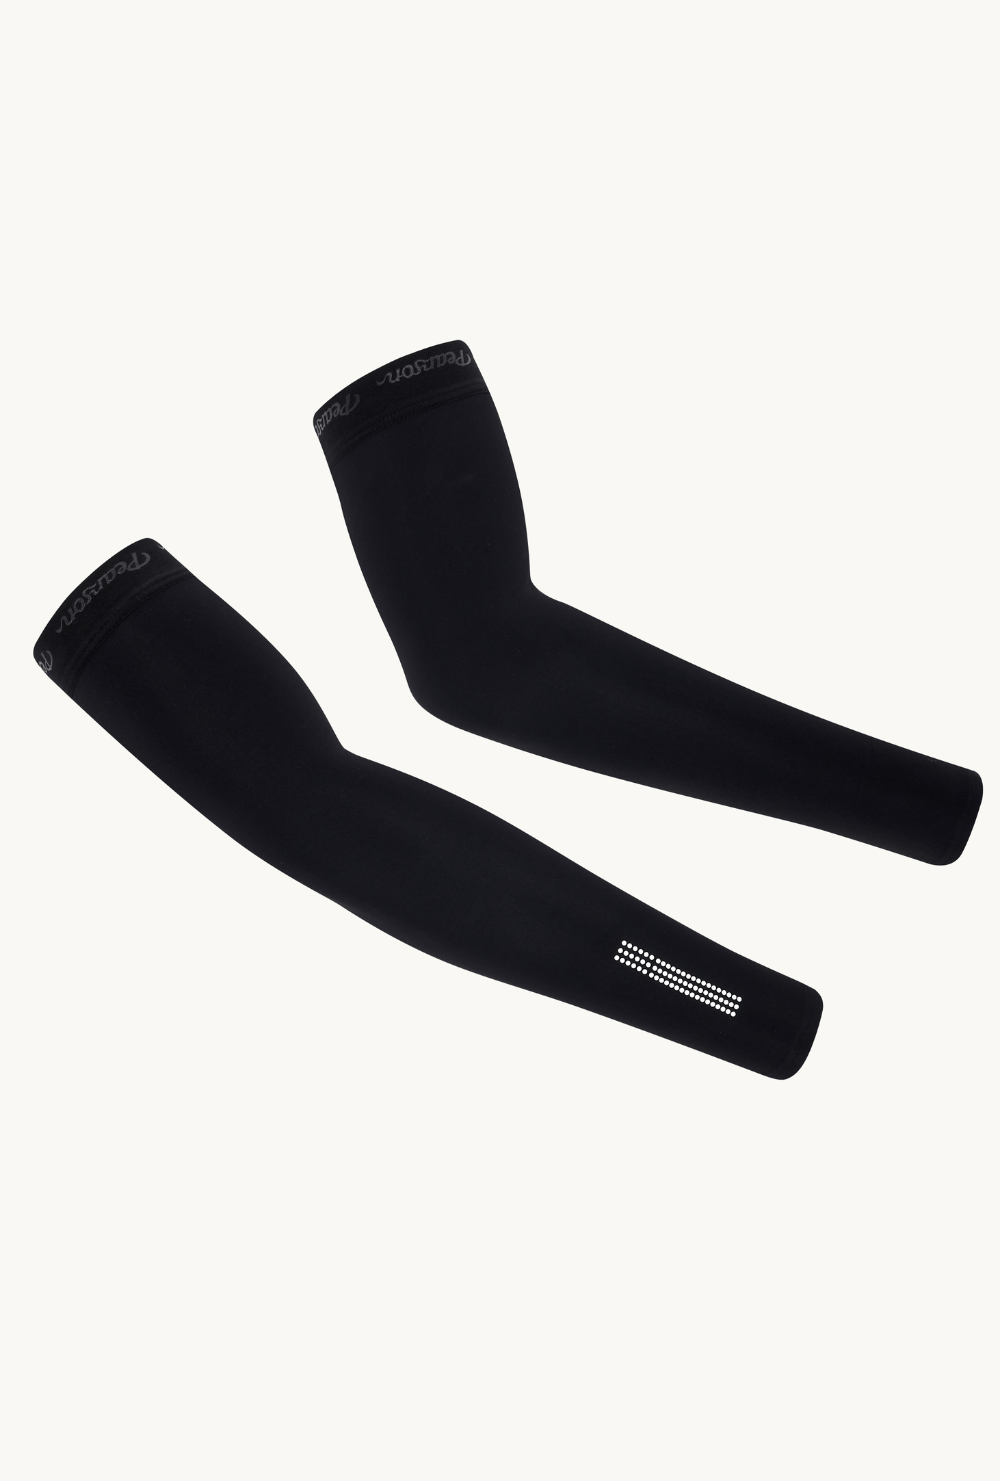 Pearson Cycles Pearson 1860, Call To Arms - Thermal Arm Warmers, Large / Black